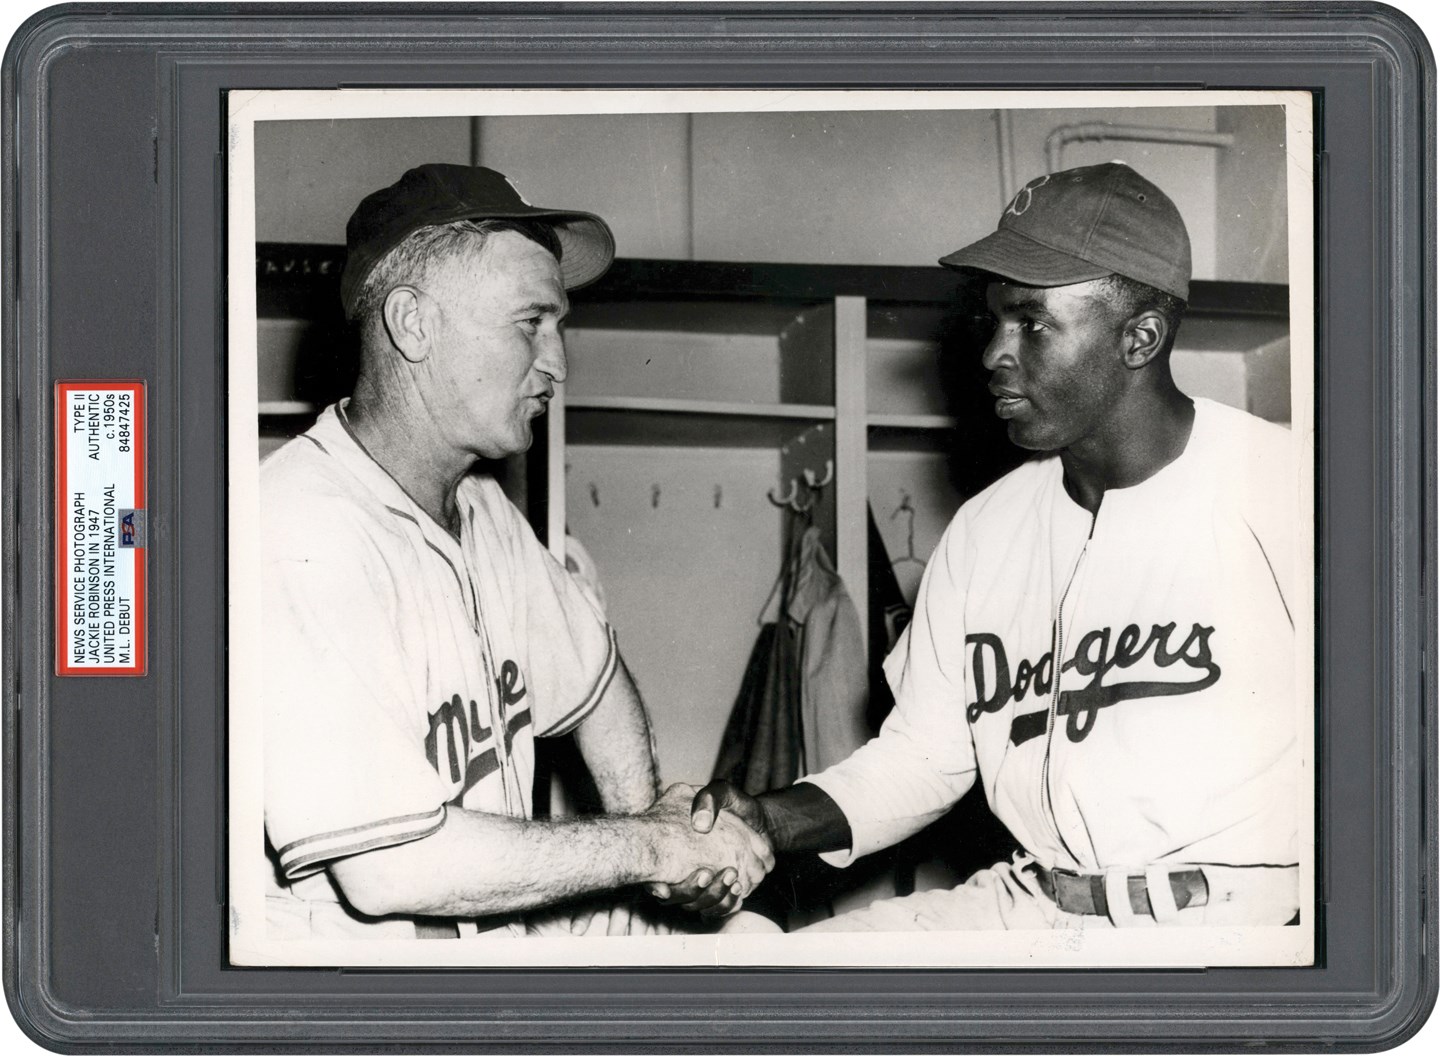 - 1947 Jackie Robinson Joins the Brooklyn Dodgers Photograph - First Time in a Dodgers Uniform (PSA Type II)